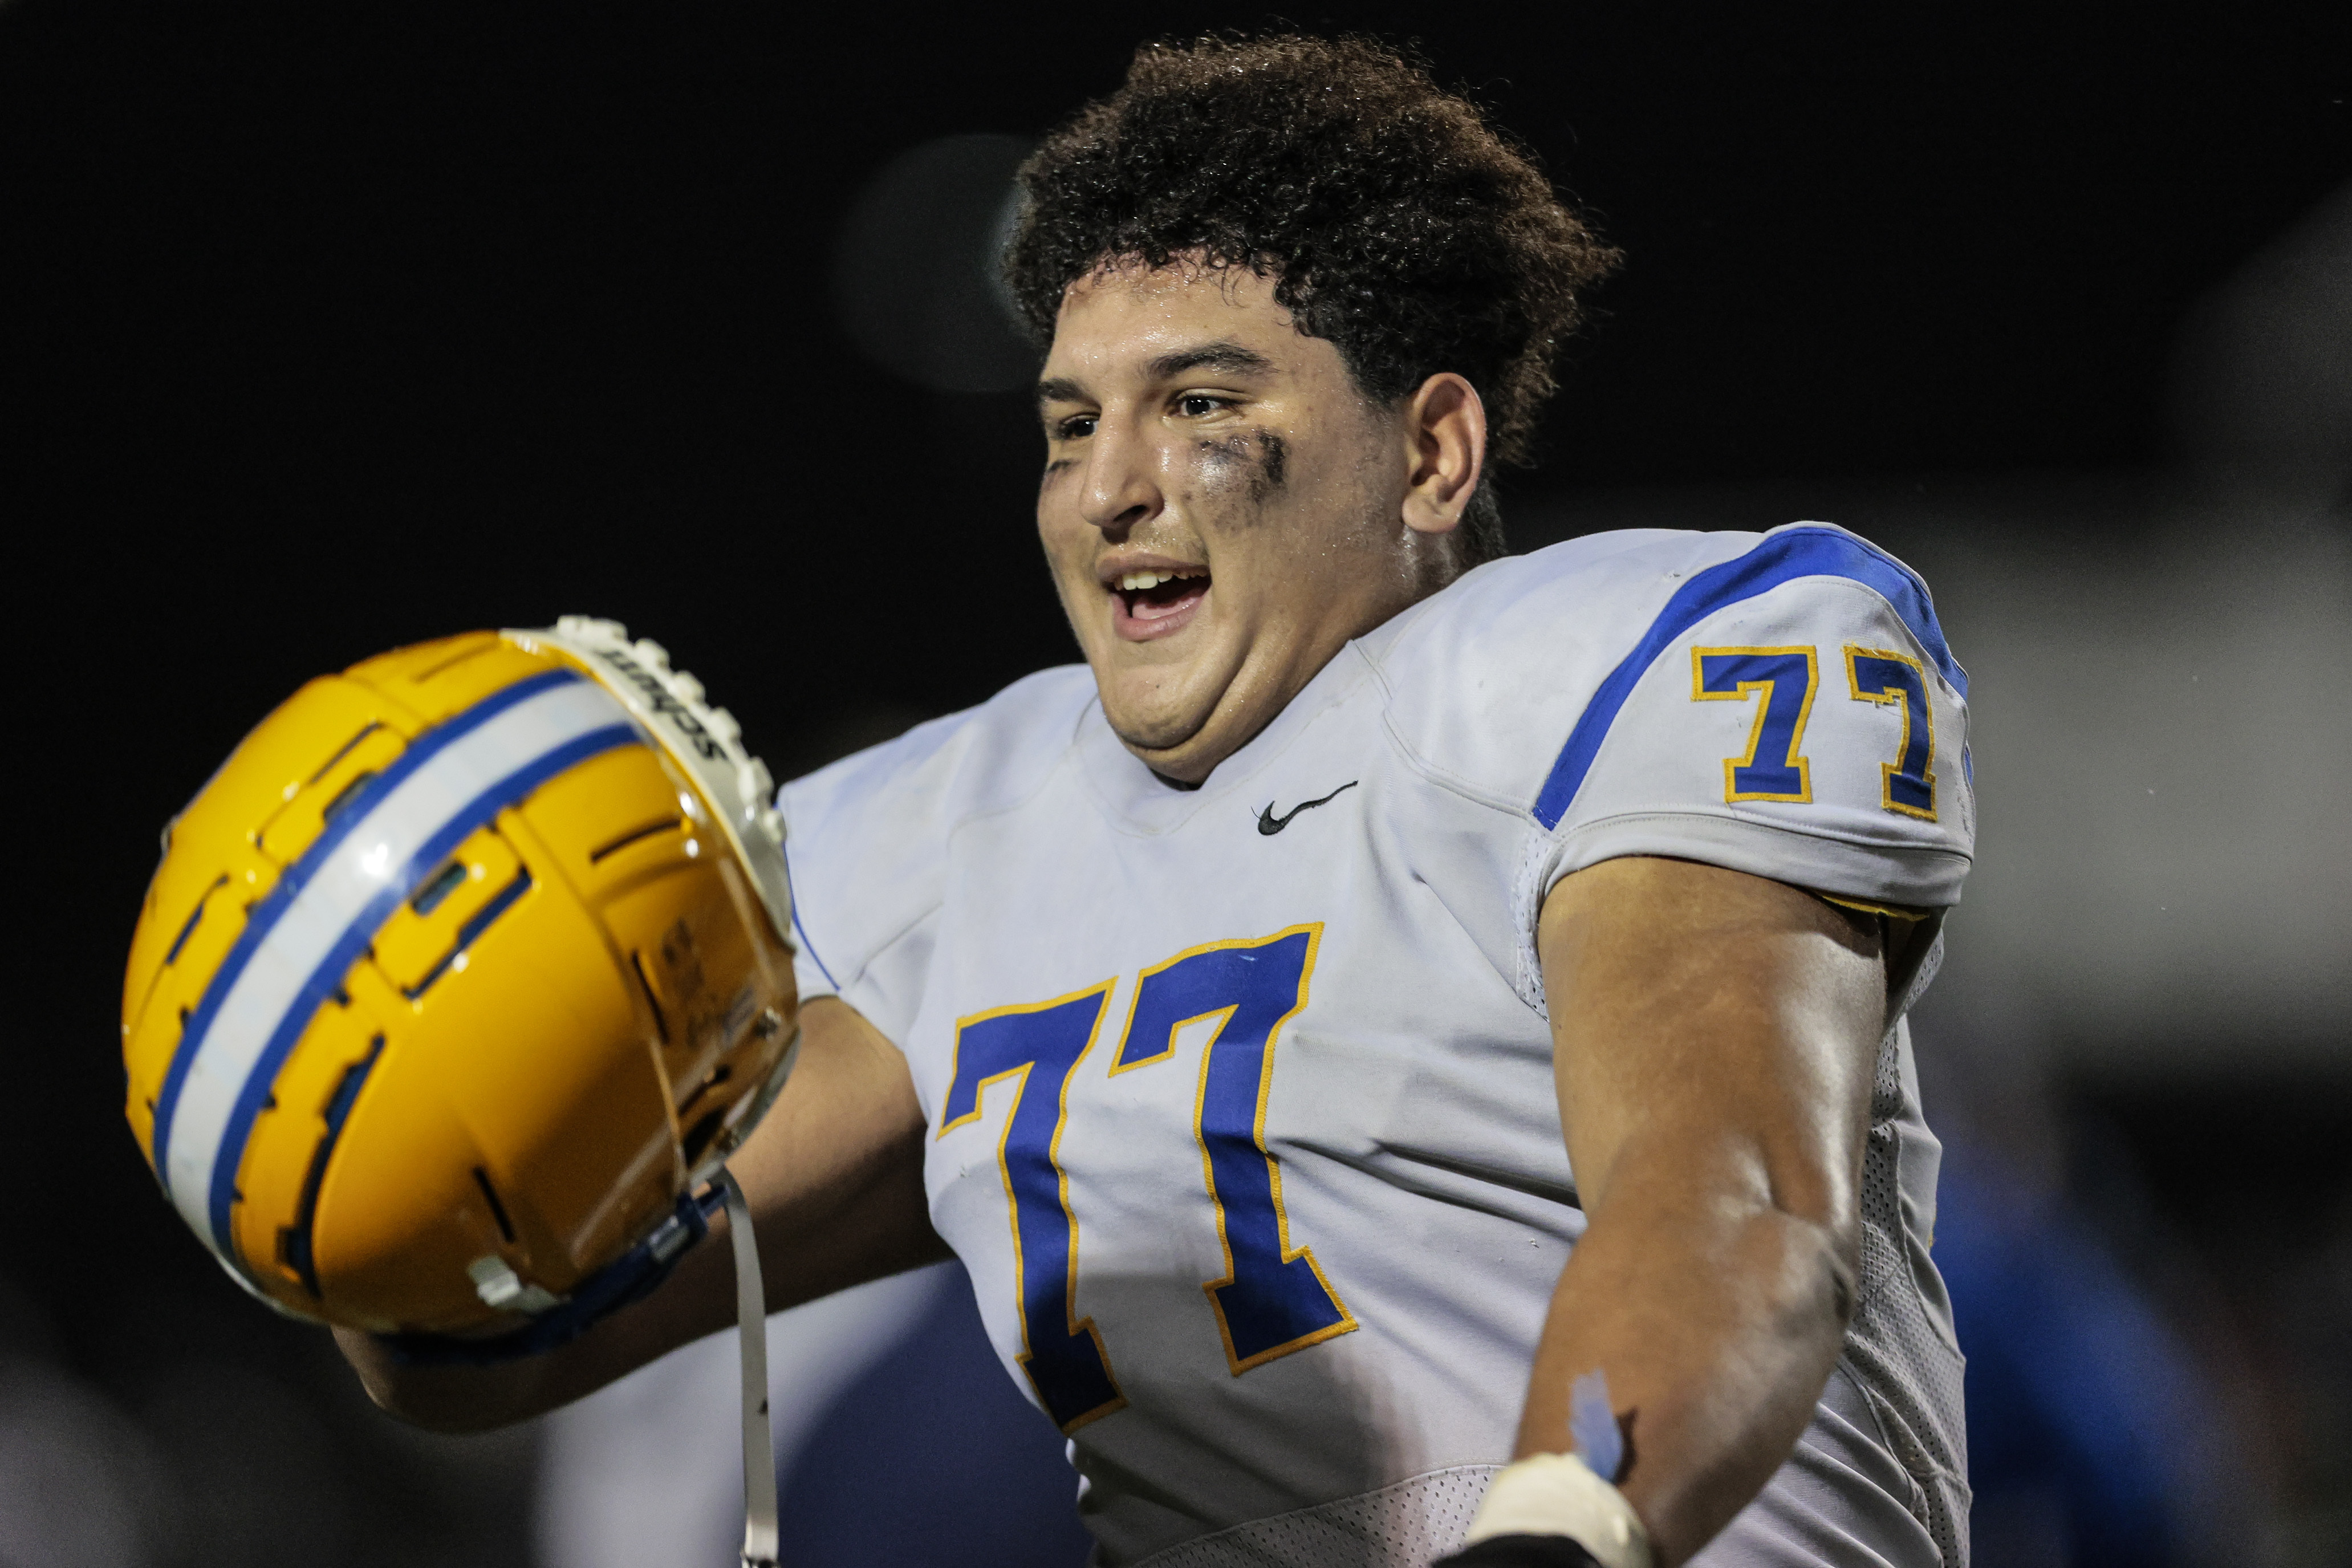 Ryan Howard, Downingtown West, Offensive Tackle